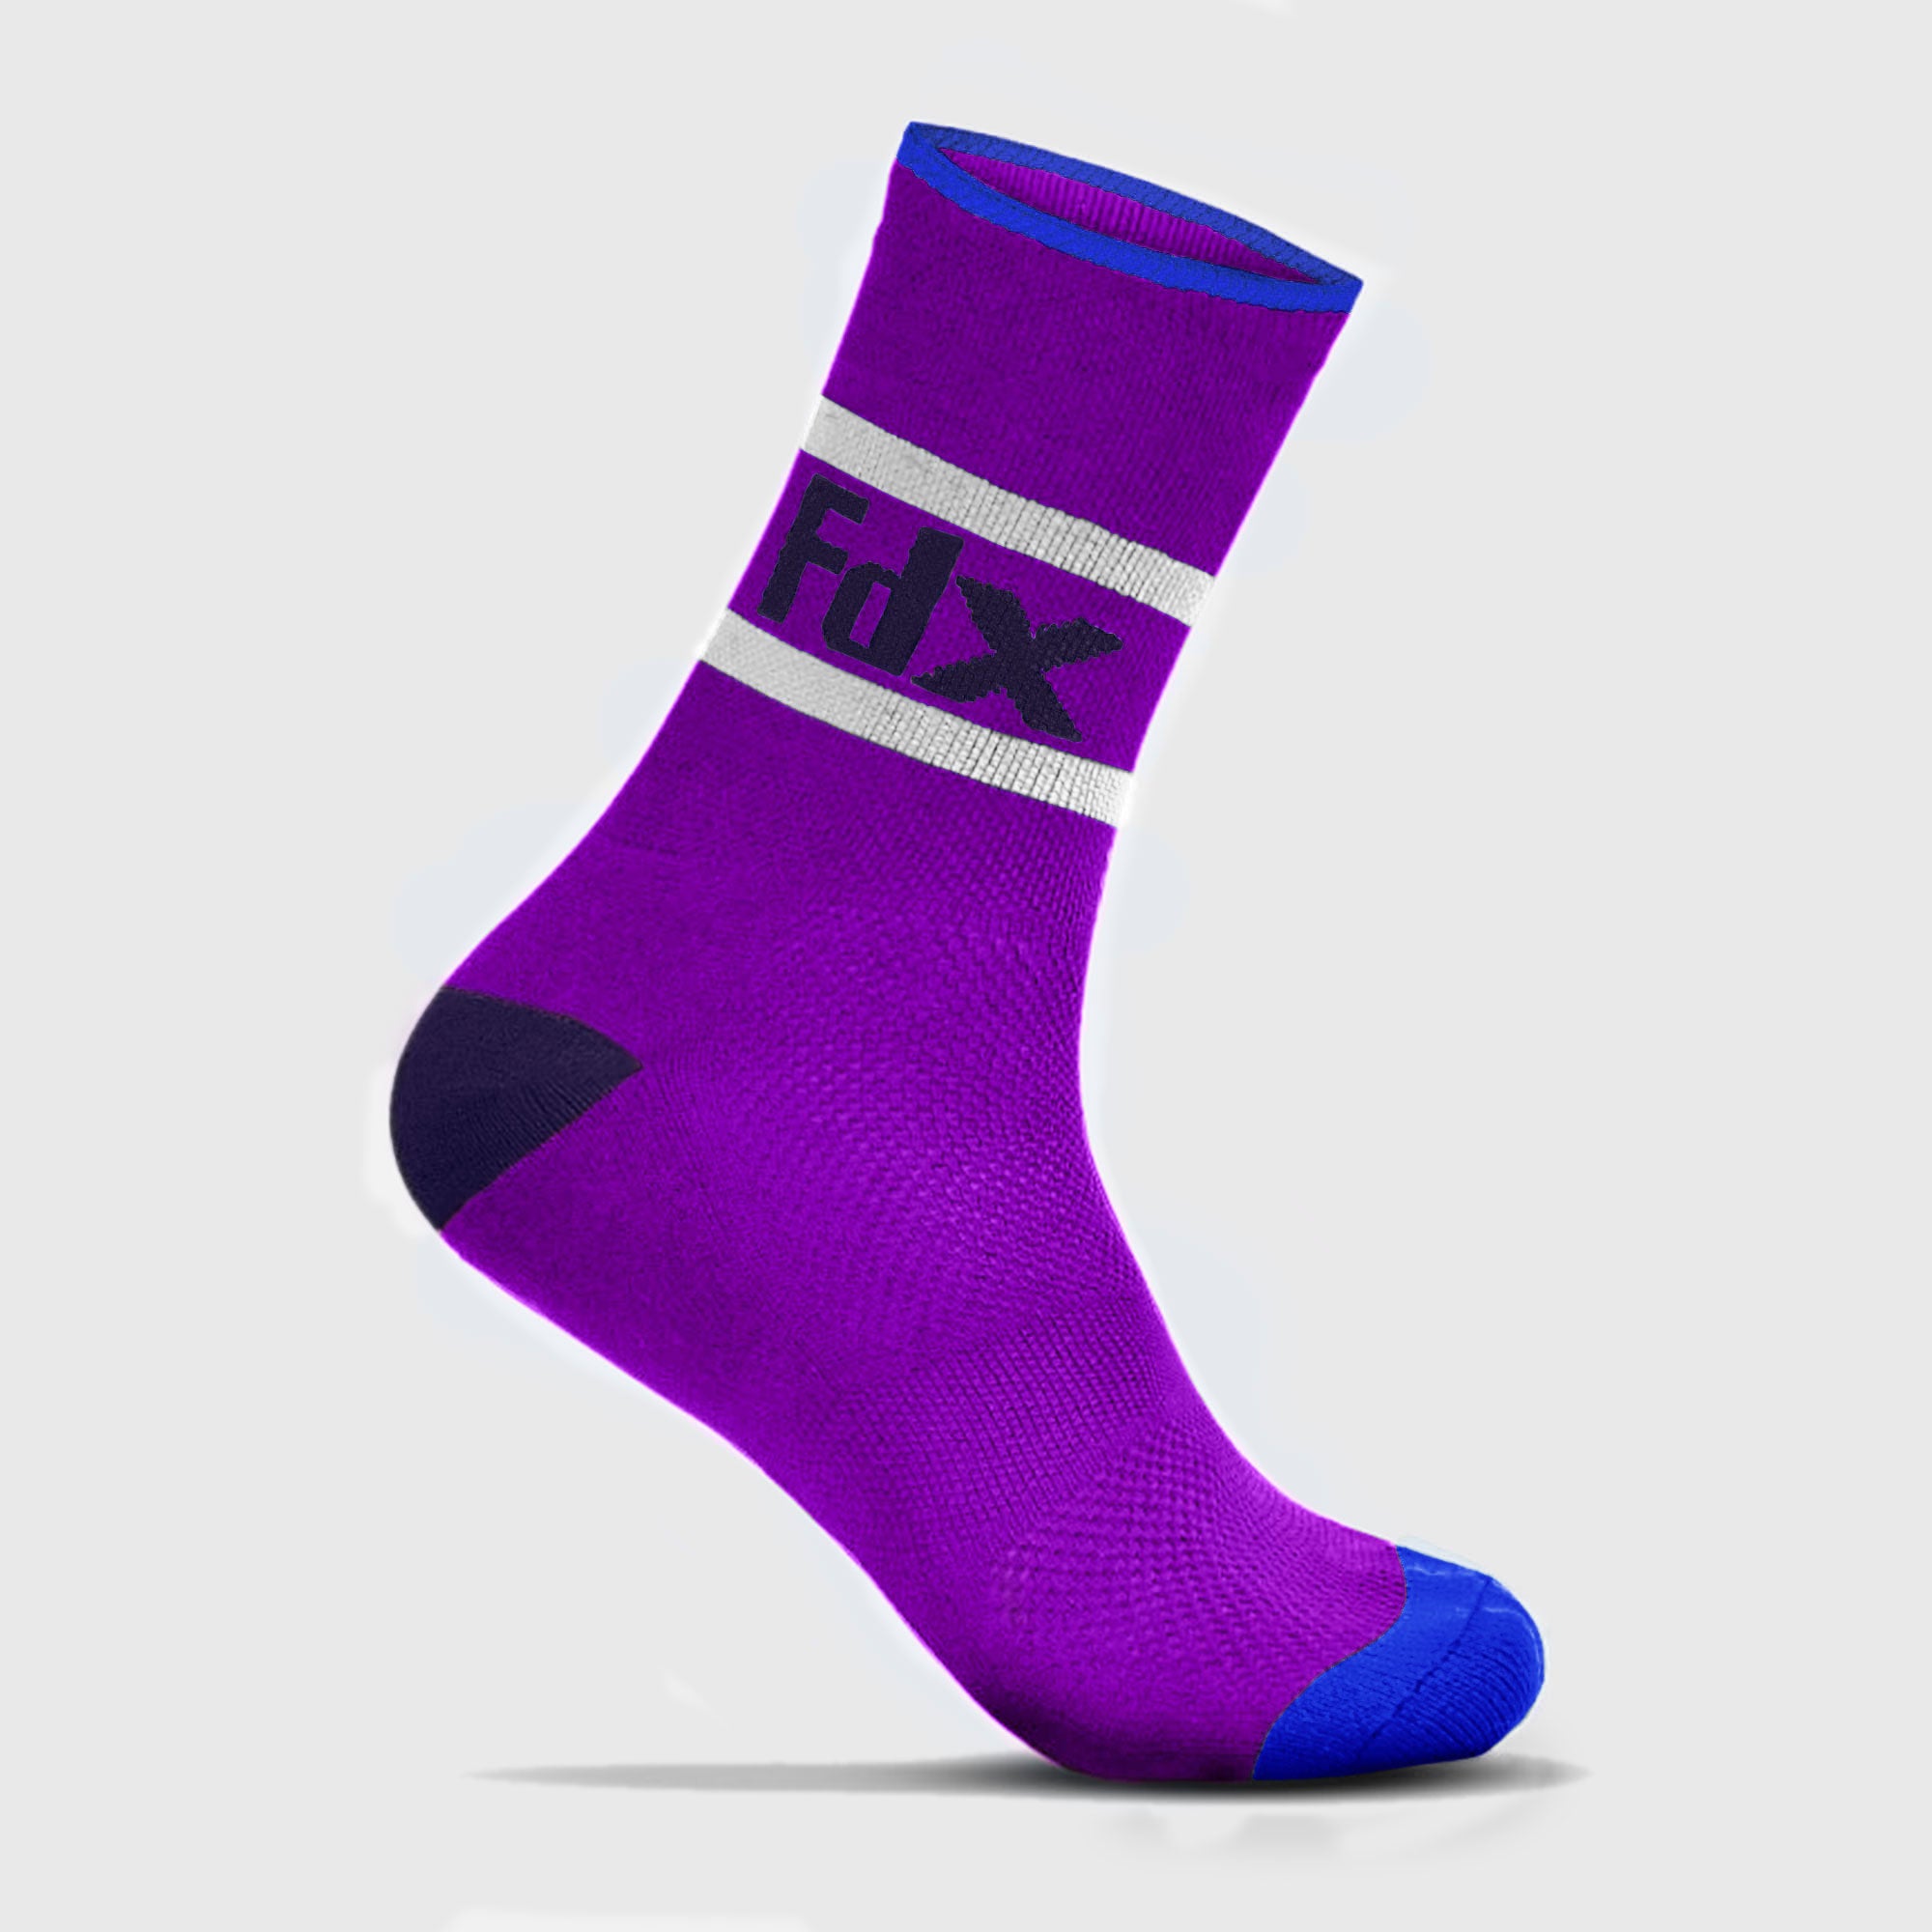 Fdx Purple Compression Socks for Cycling & Running